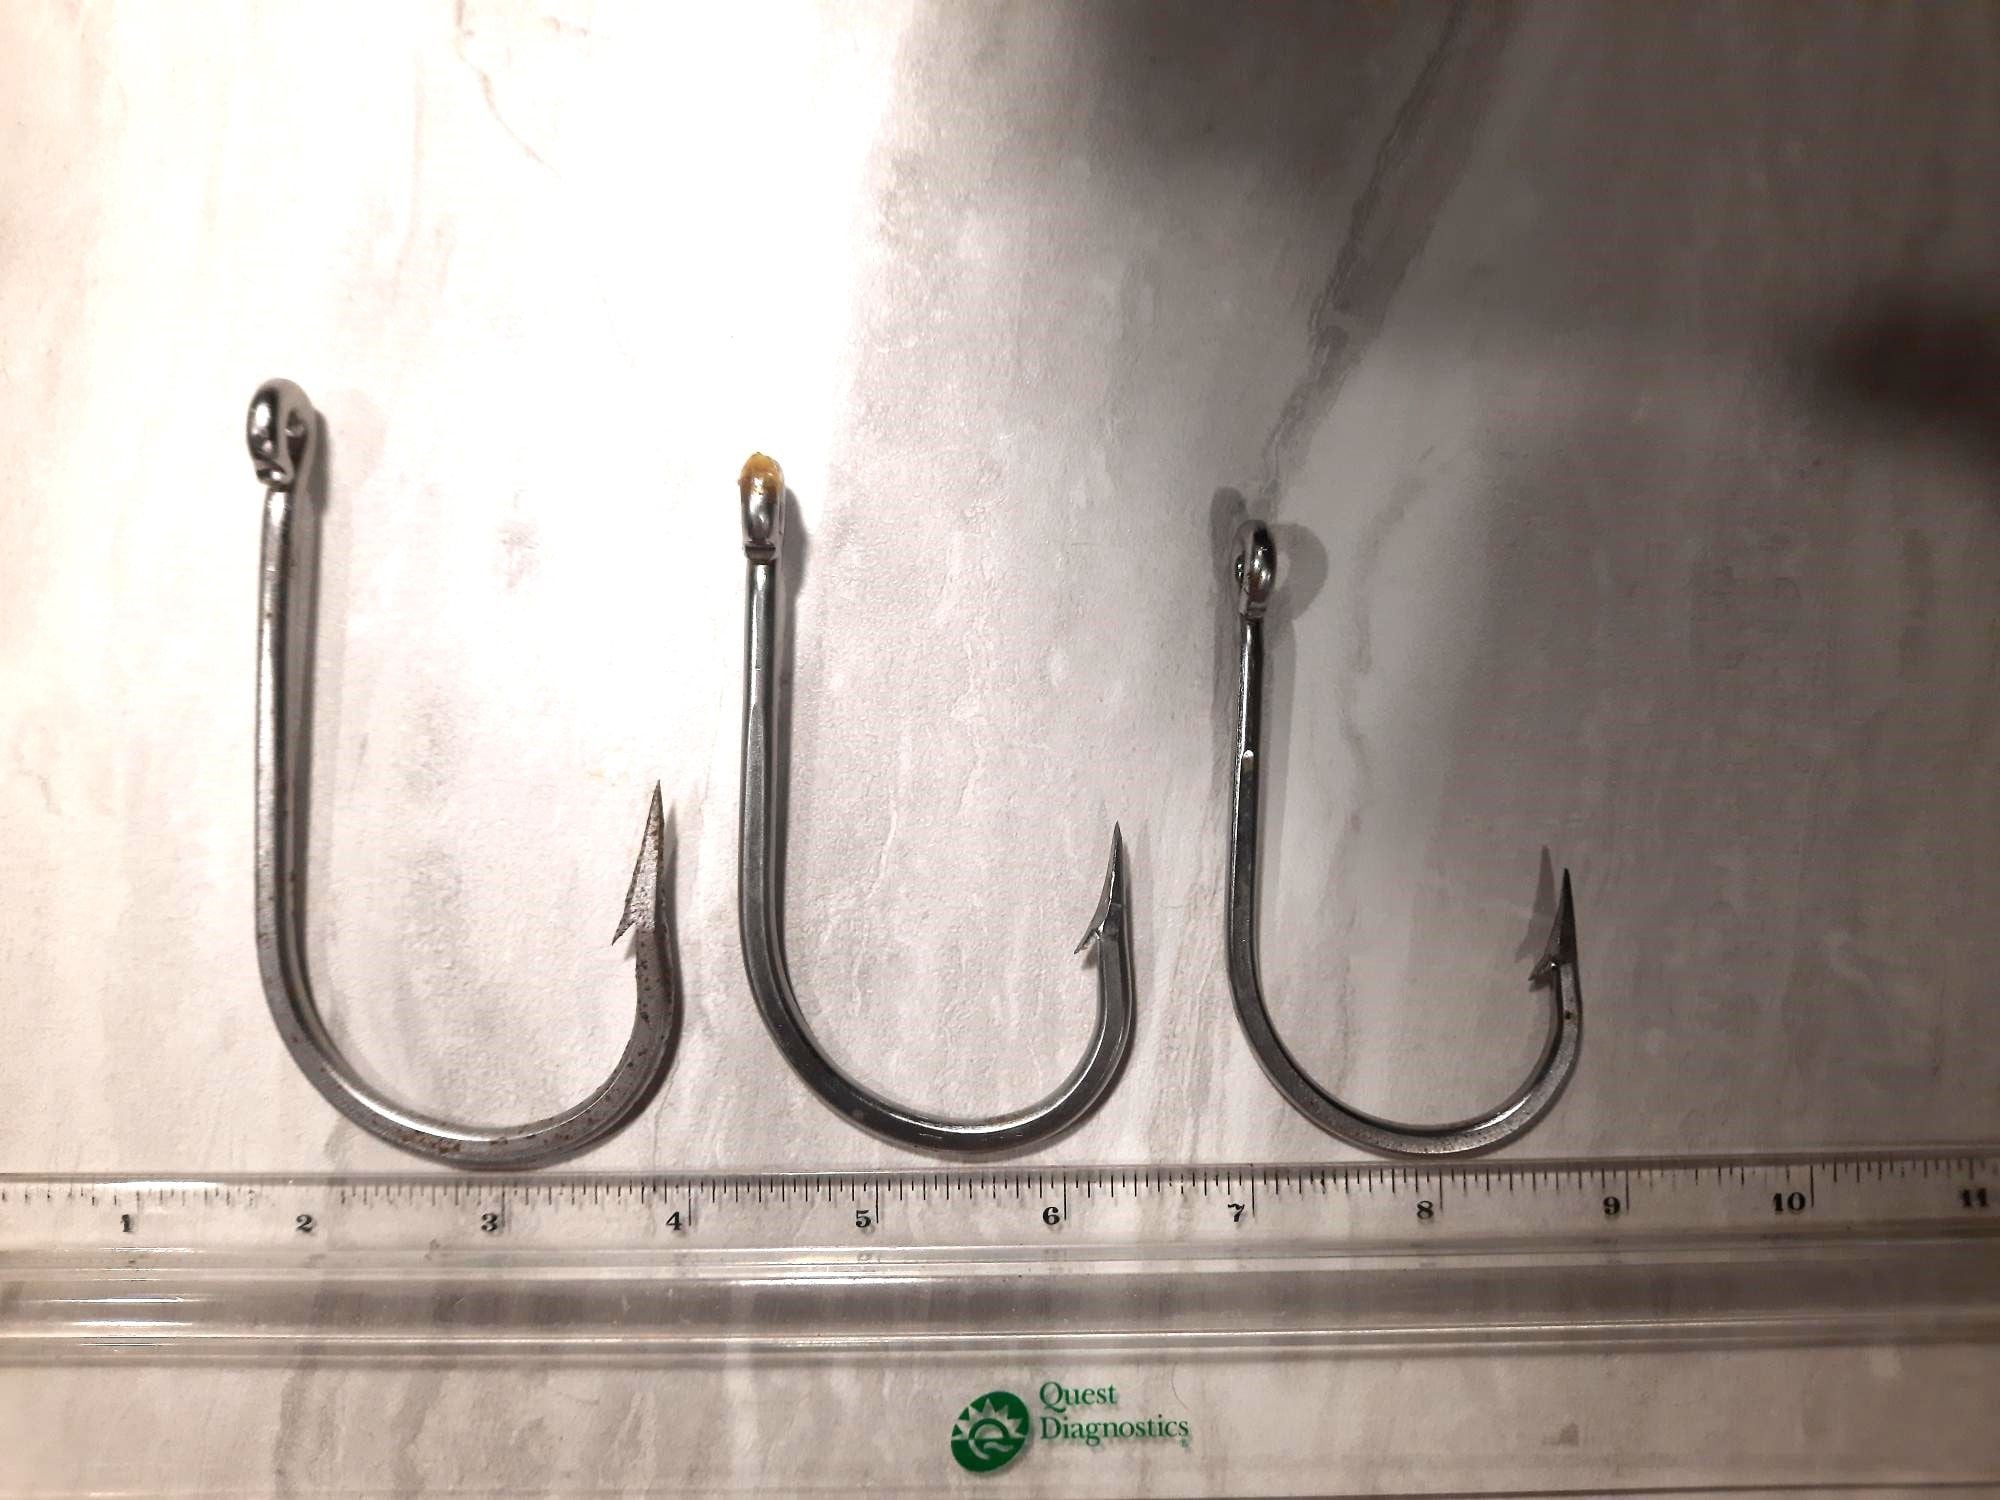 7732 hooks for sale - The Hull Truth - Boating and Fishing Forum